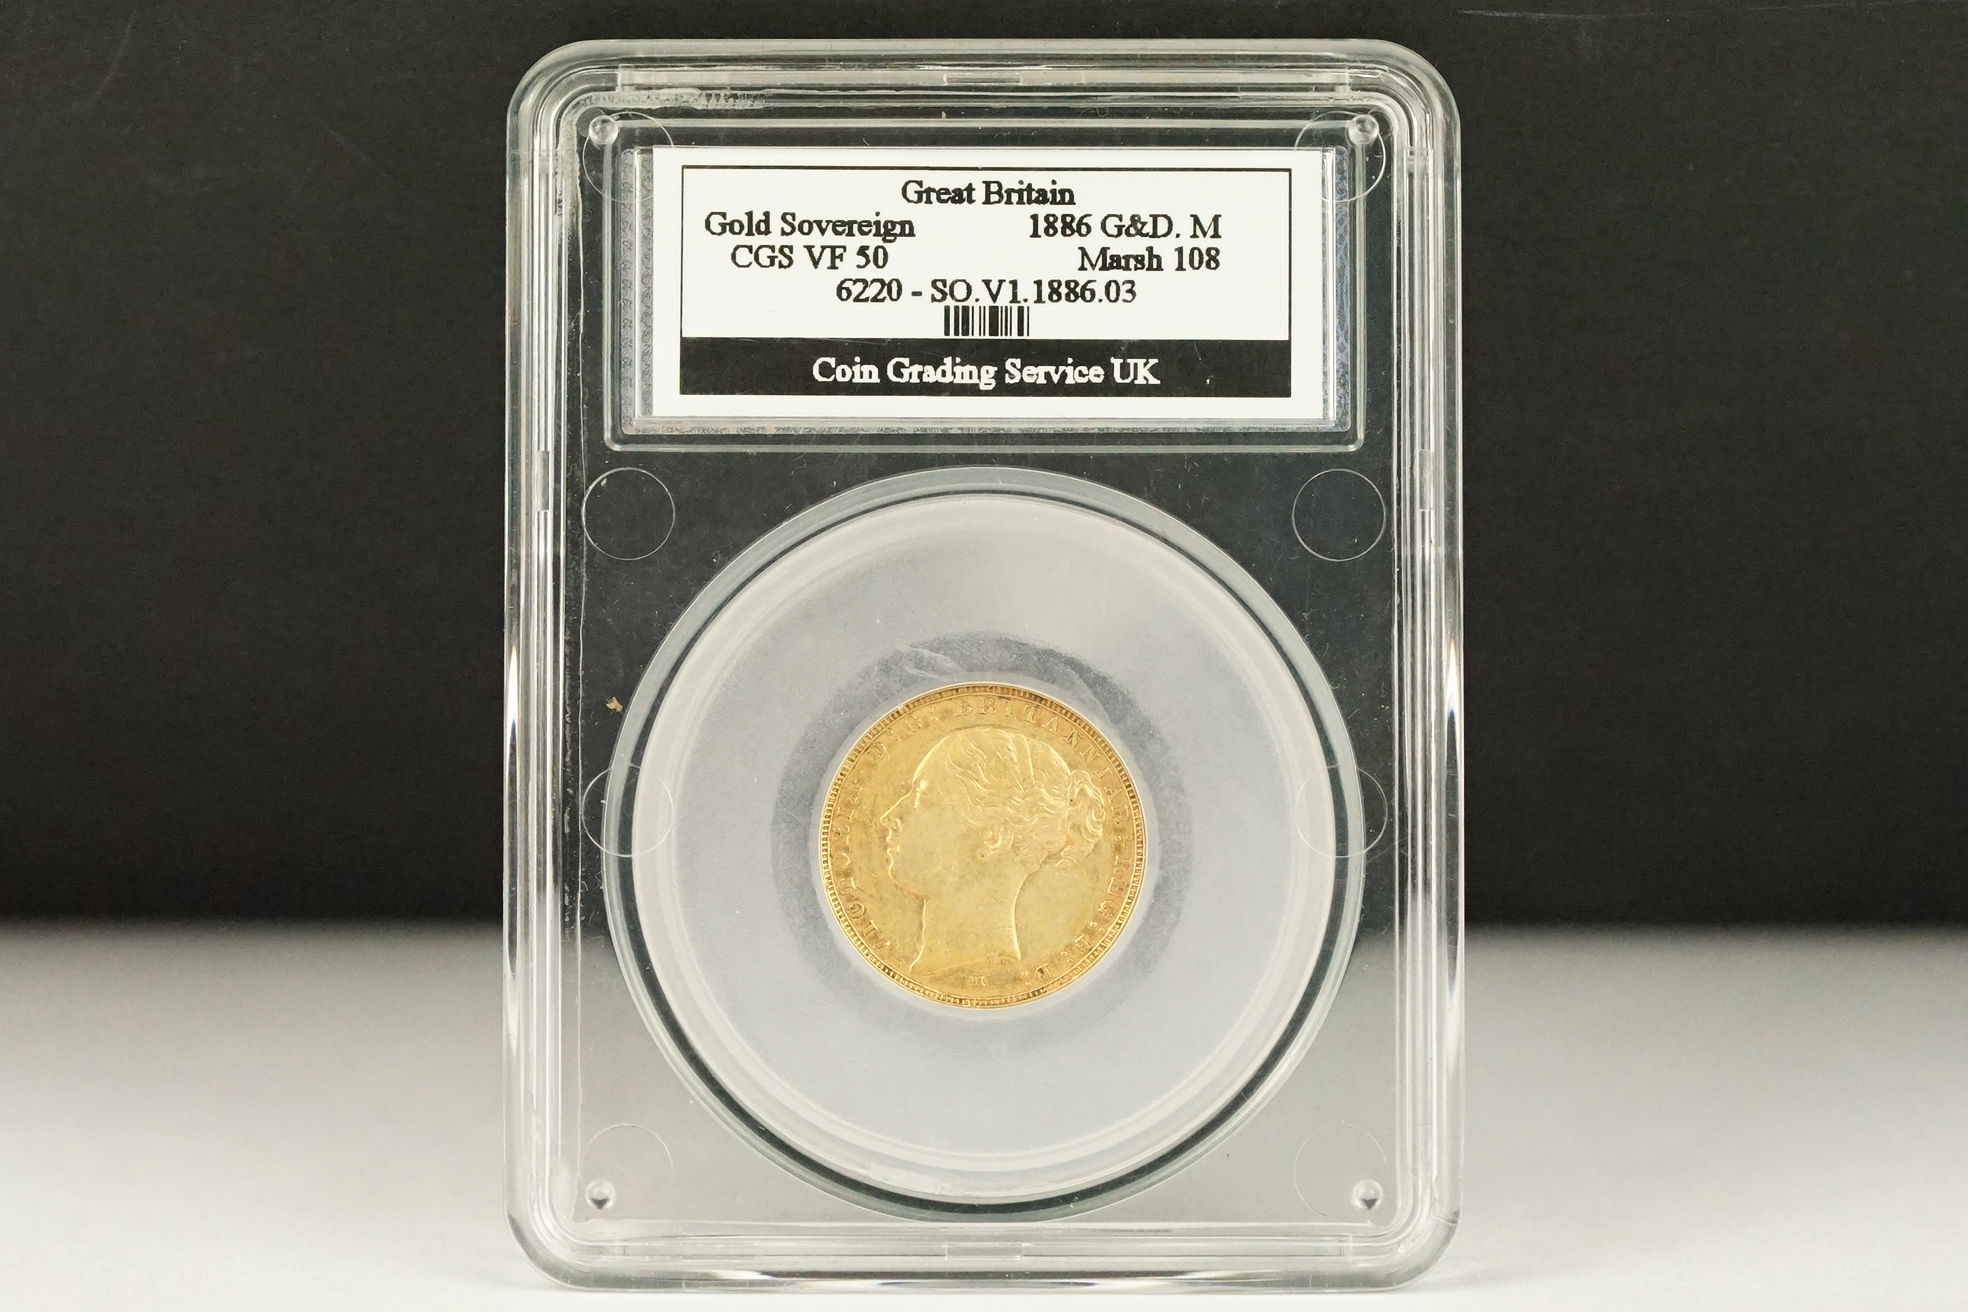 A Queen Victoria 1886 Melbourne Mint gold full sovereign coin, CGS slab mounted.